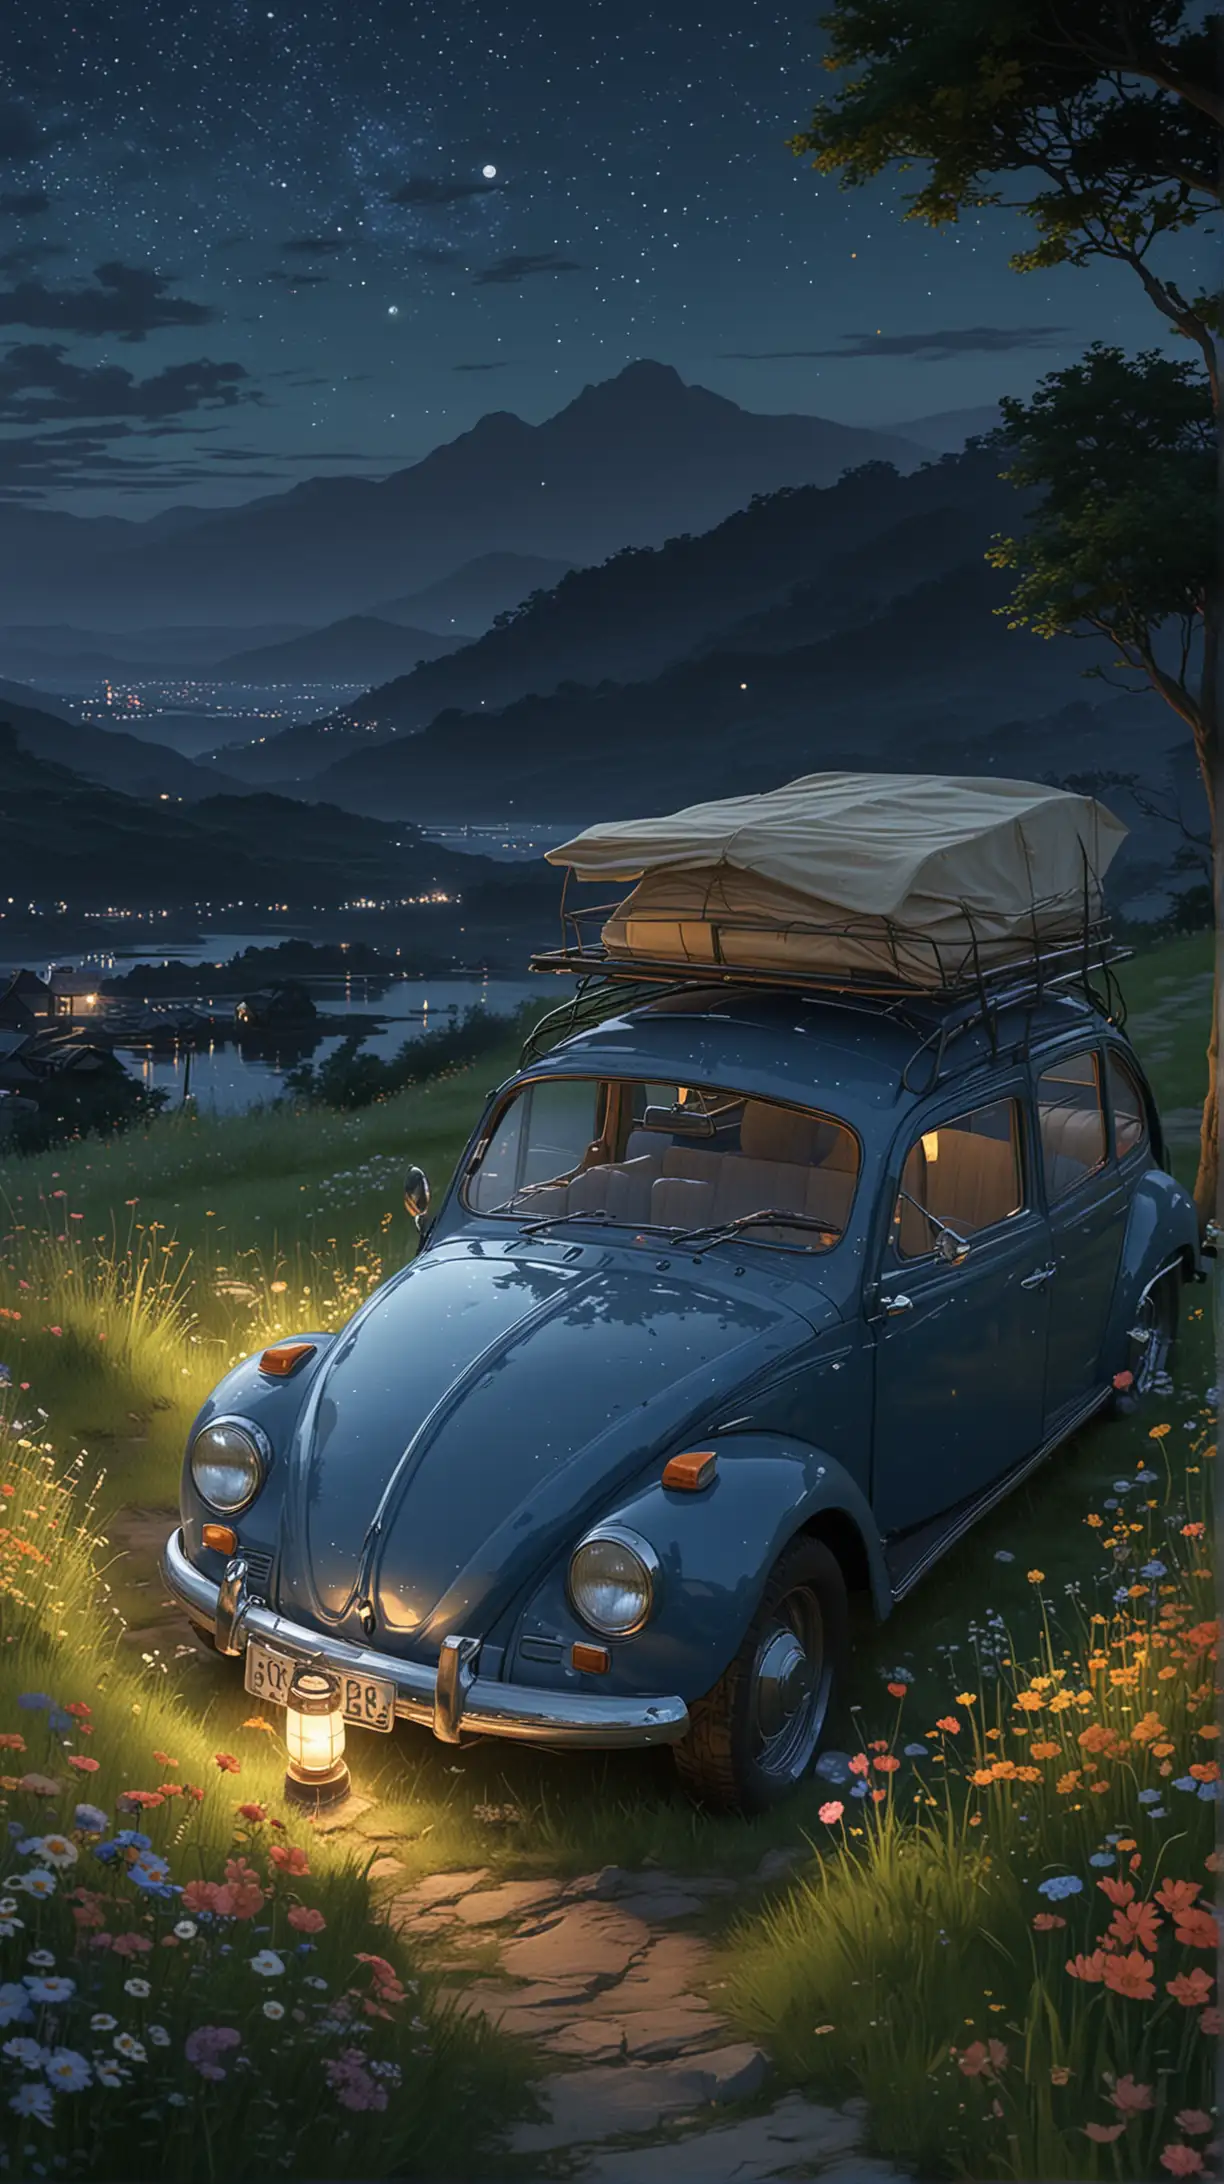 Youthful Duo Enjoying Starry Night on Hilltop VW Car Roof